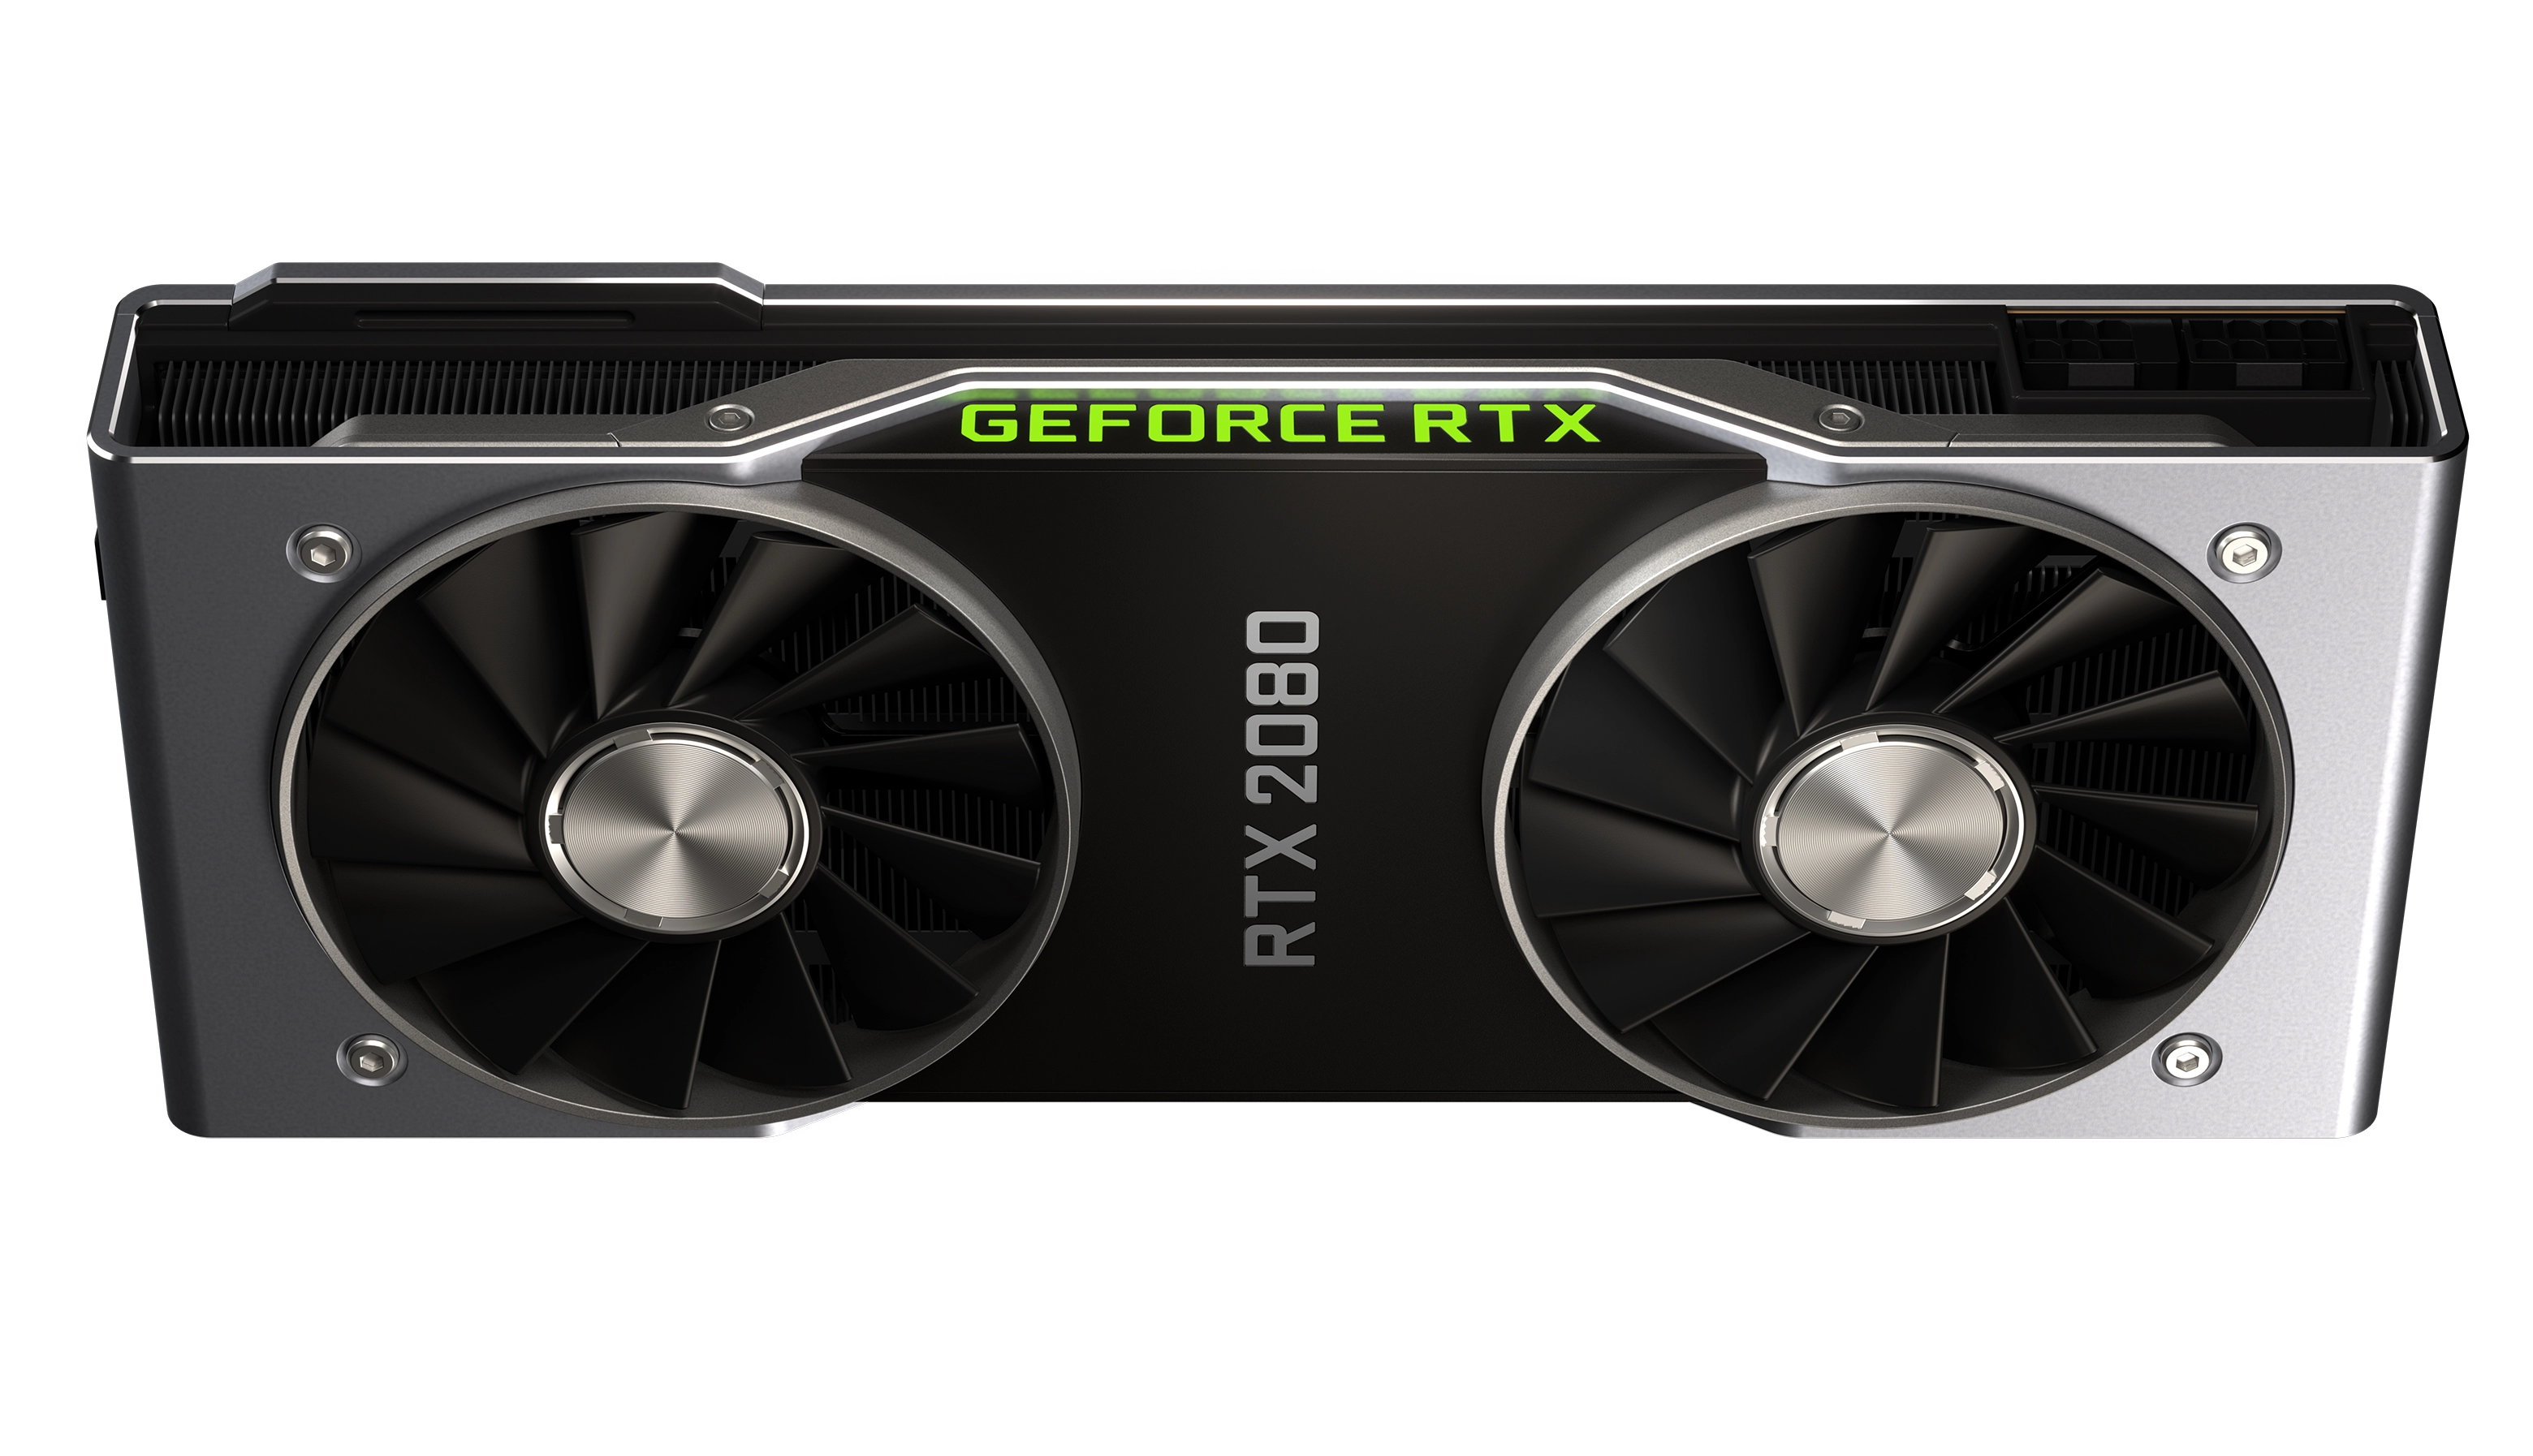 Nvidia GeForce RTX 2080 Founders Edition Behind View